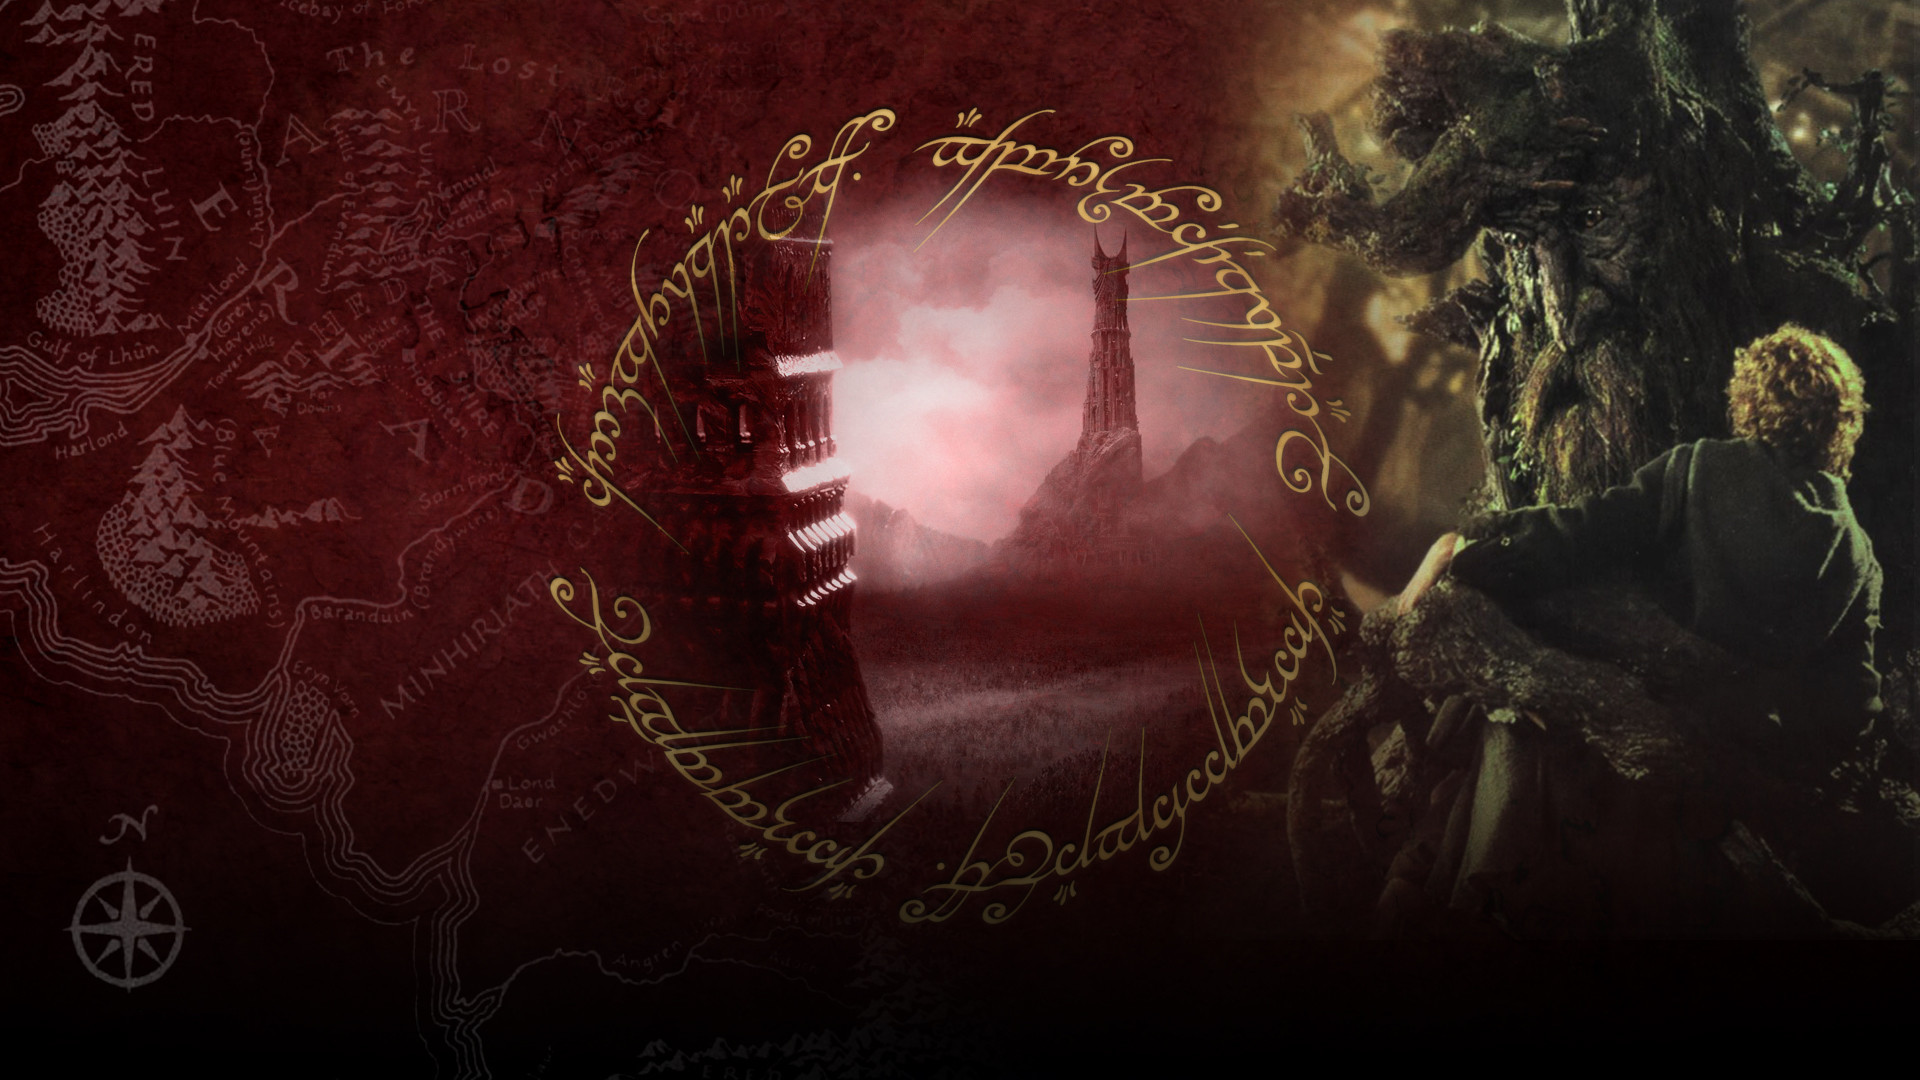 The Lord Of The Rings - The Two Towers Wallpapers